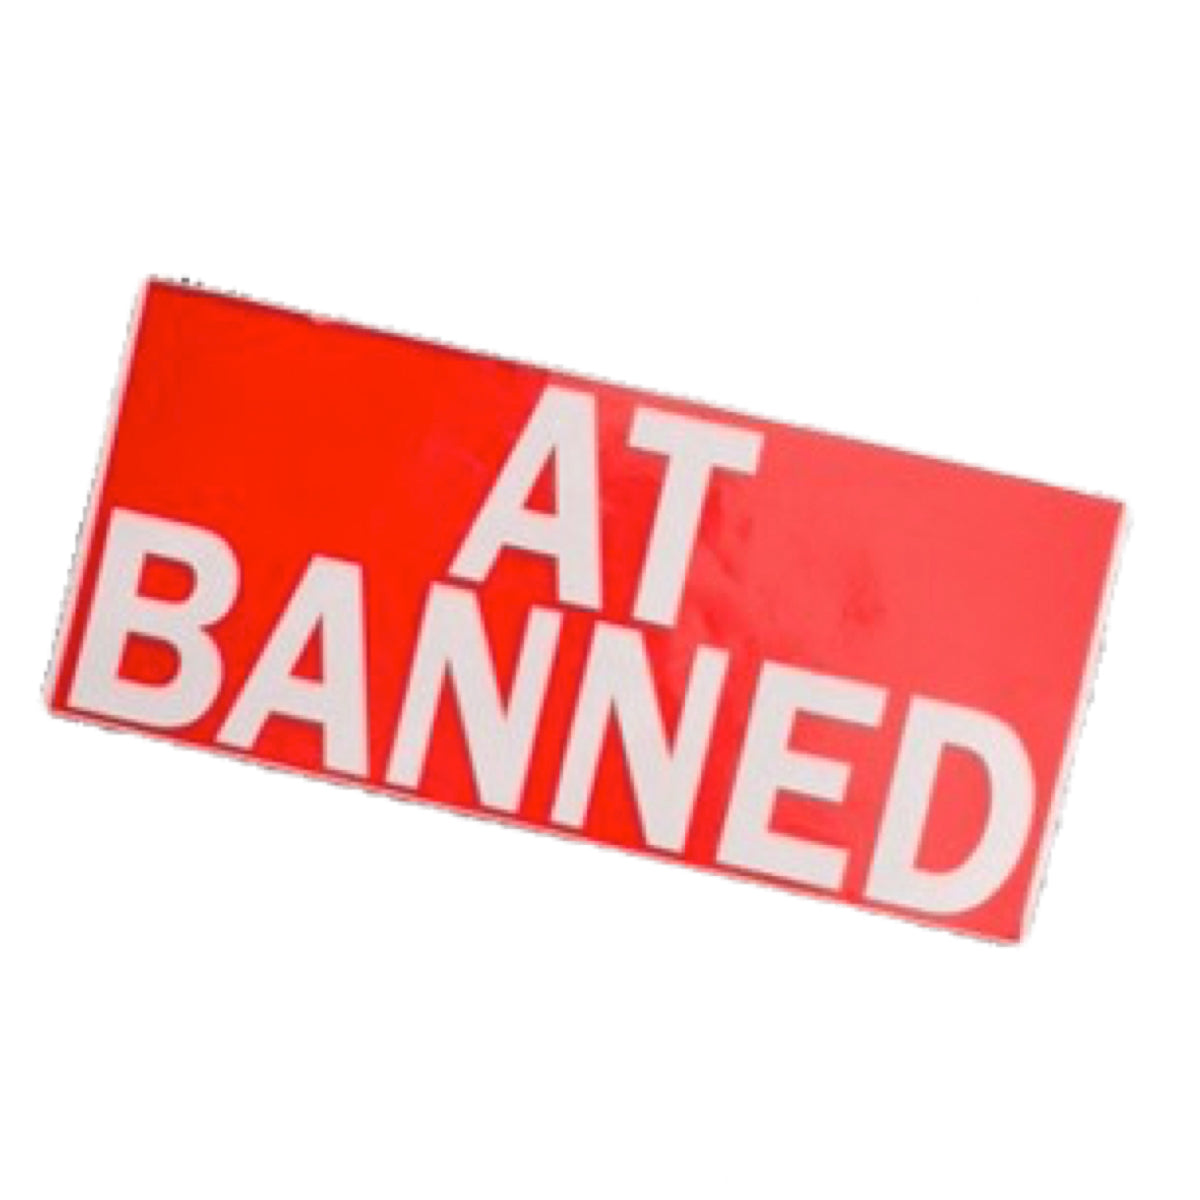 BANNED Large Sticker  "AT BANNED" 10.5"X 5"